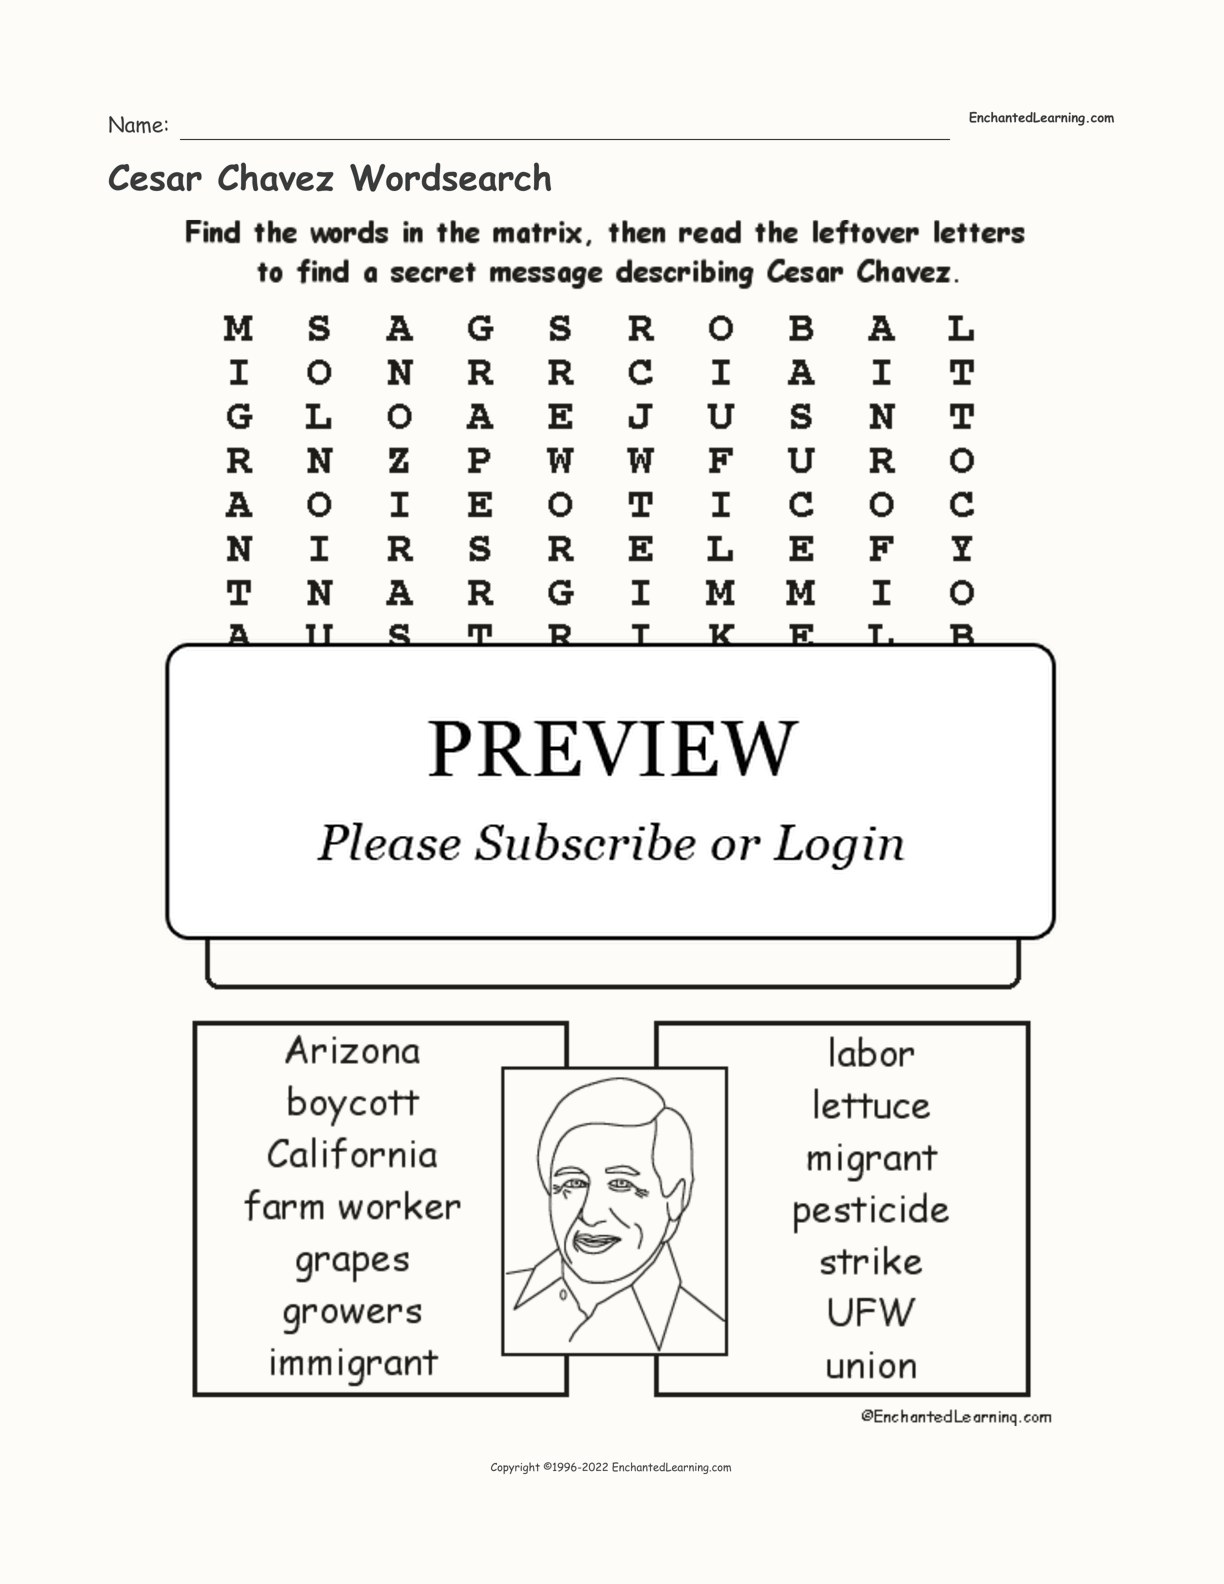 Cesar Chavez Wordsearch Enchanted Learning